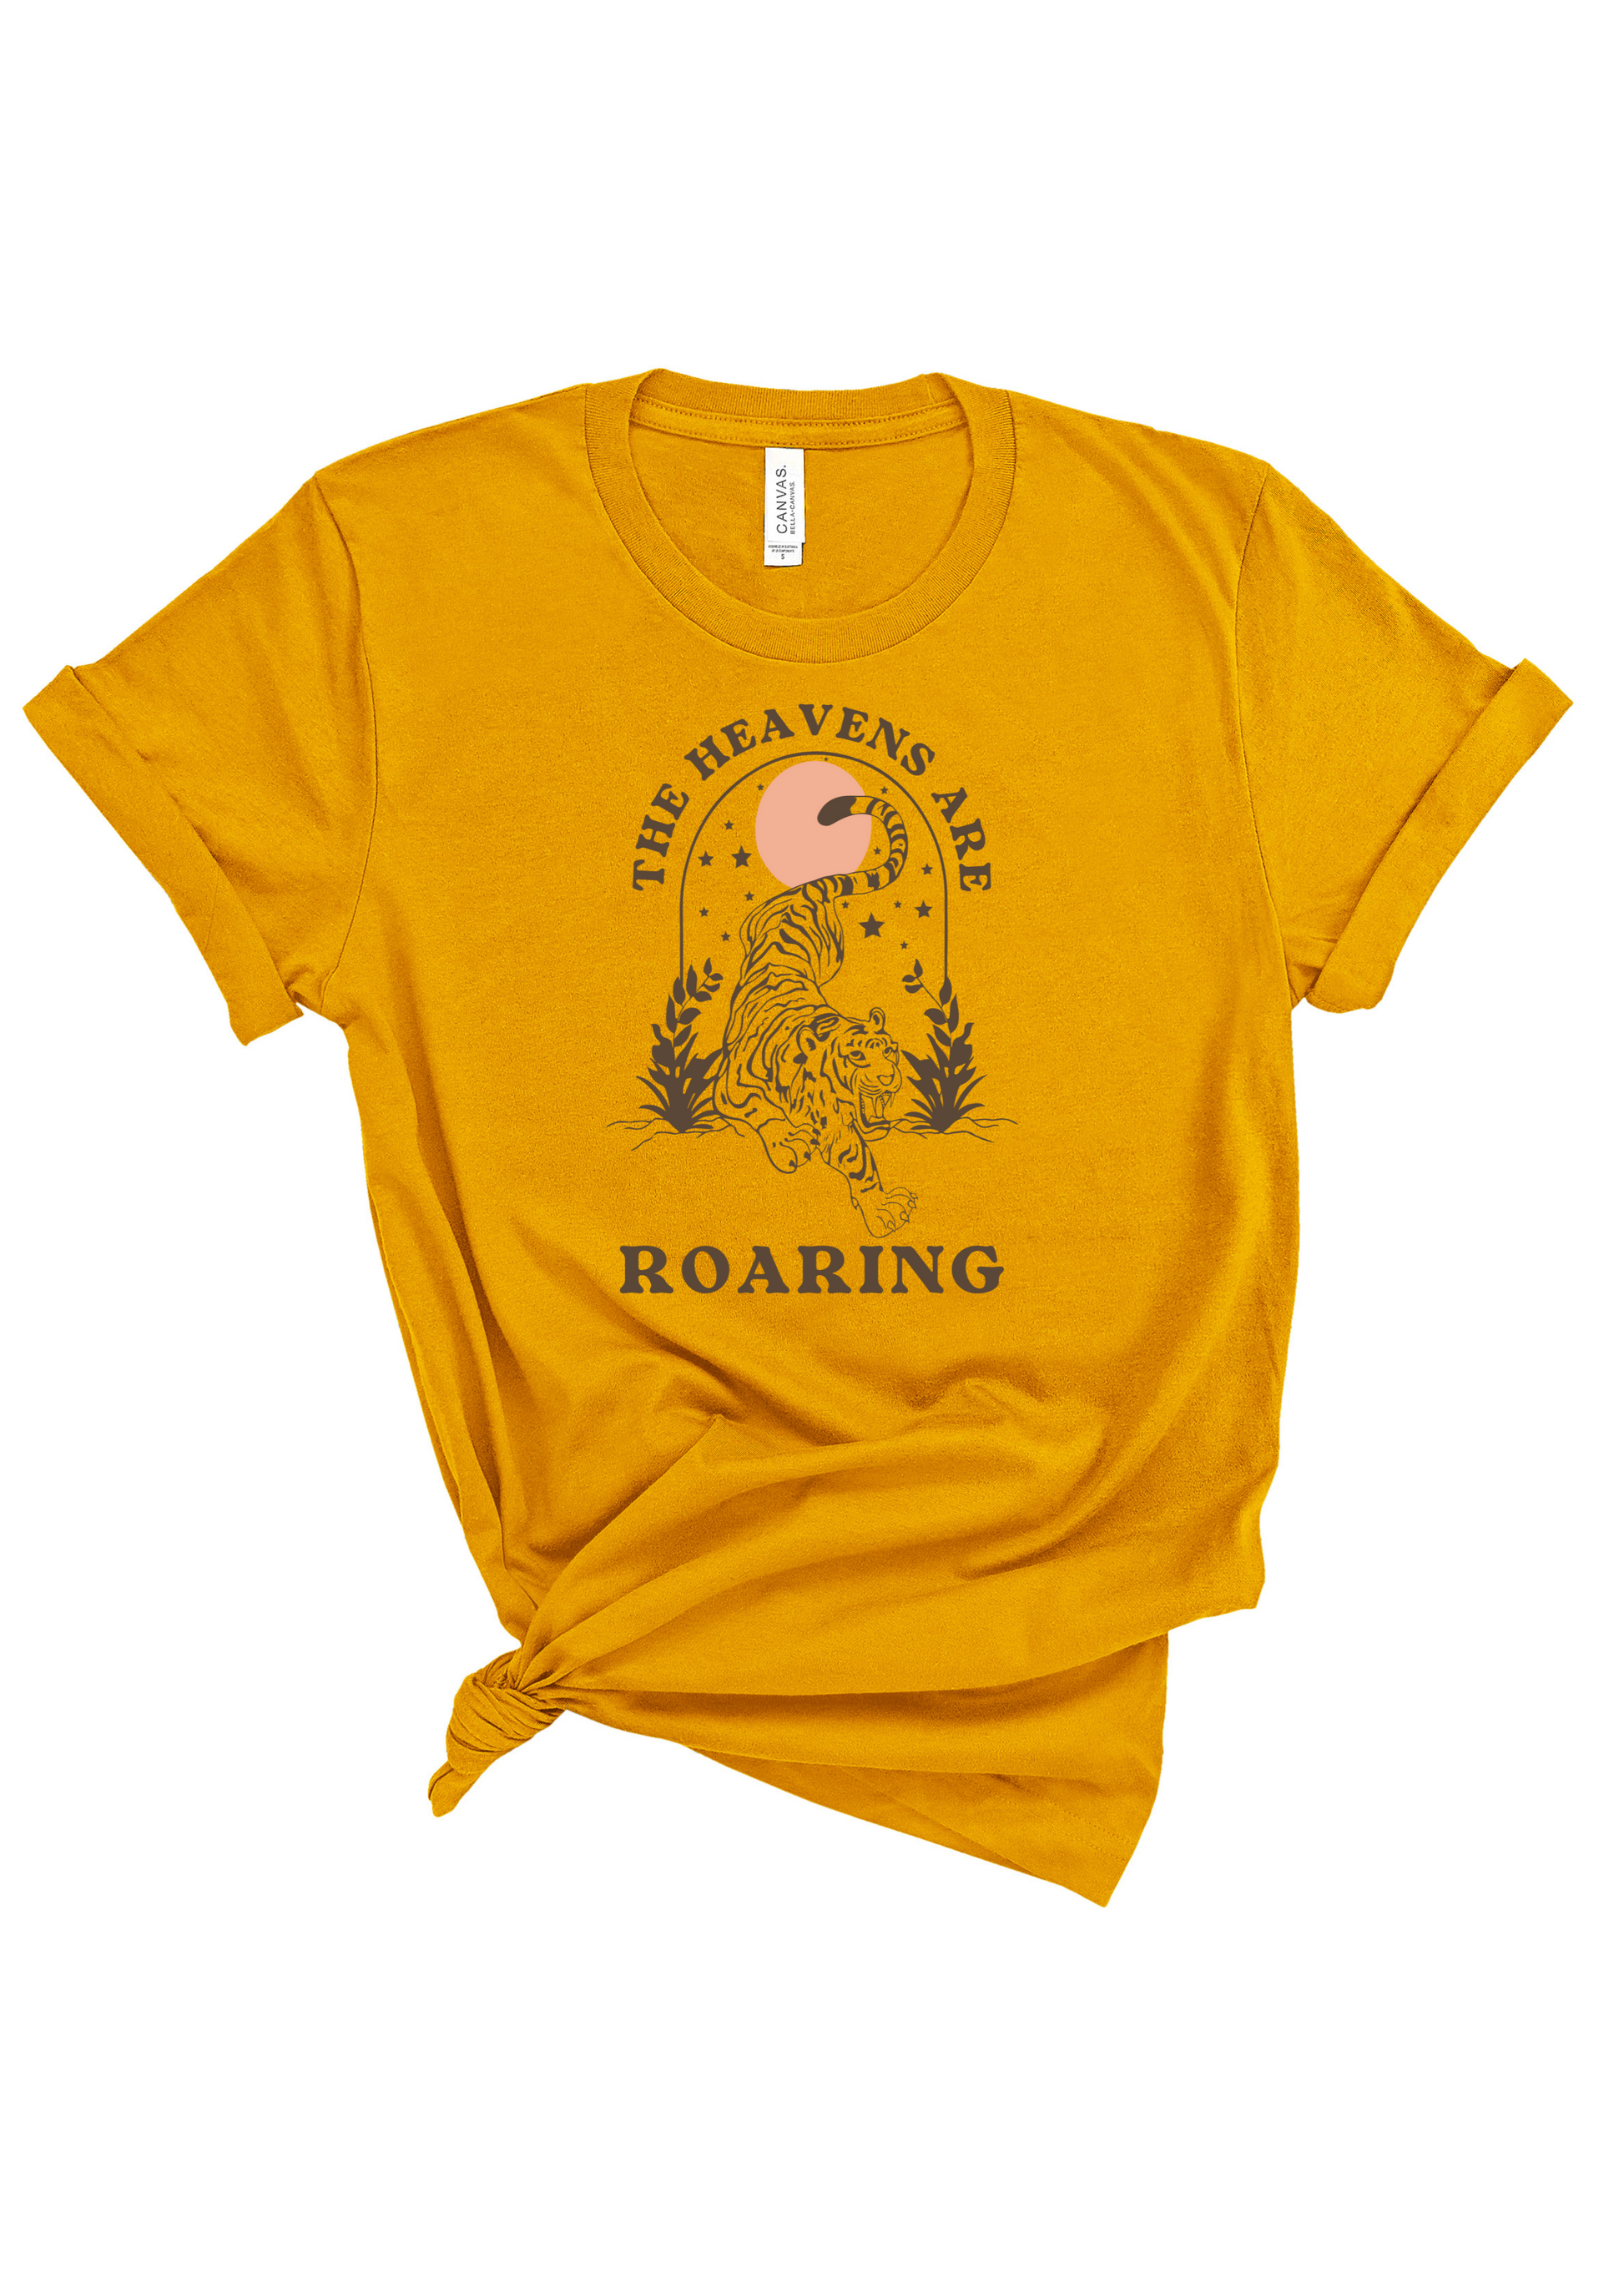 Heavens are Roaring | Adult Tee | RTS-Sister Shirts-Sister Shirts, Cute & Custom Tees for Mama & Littles in Trussville, Alabama.